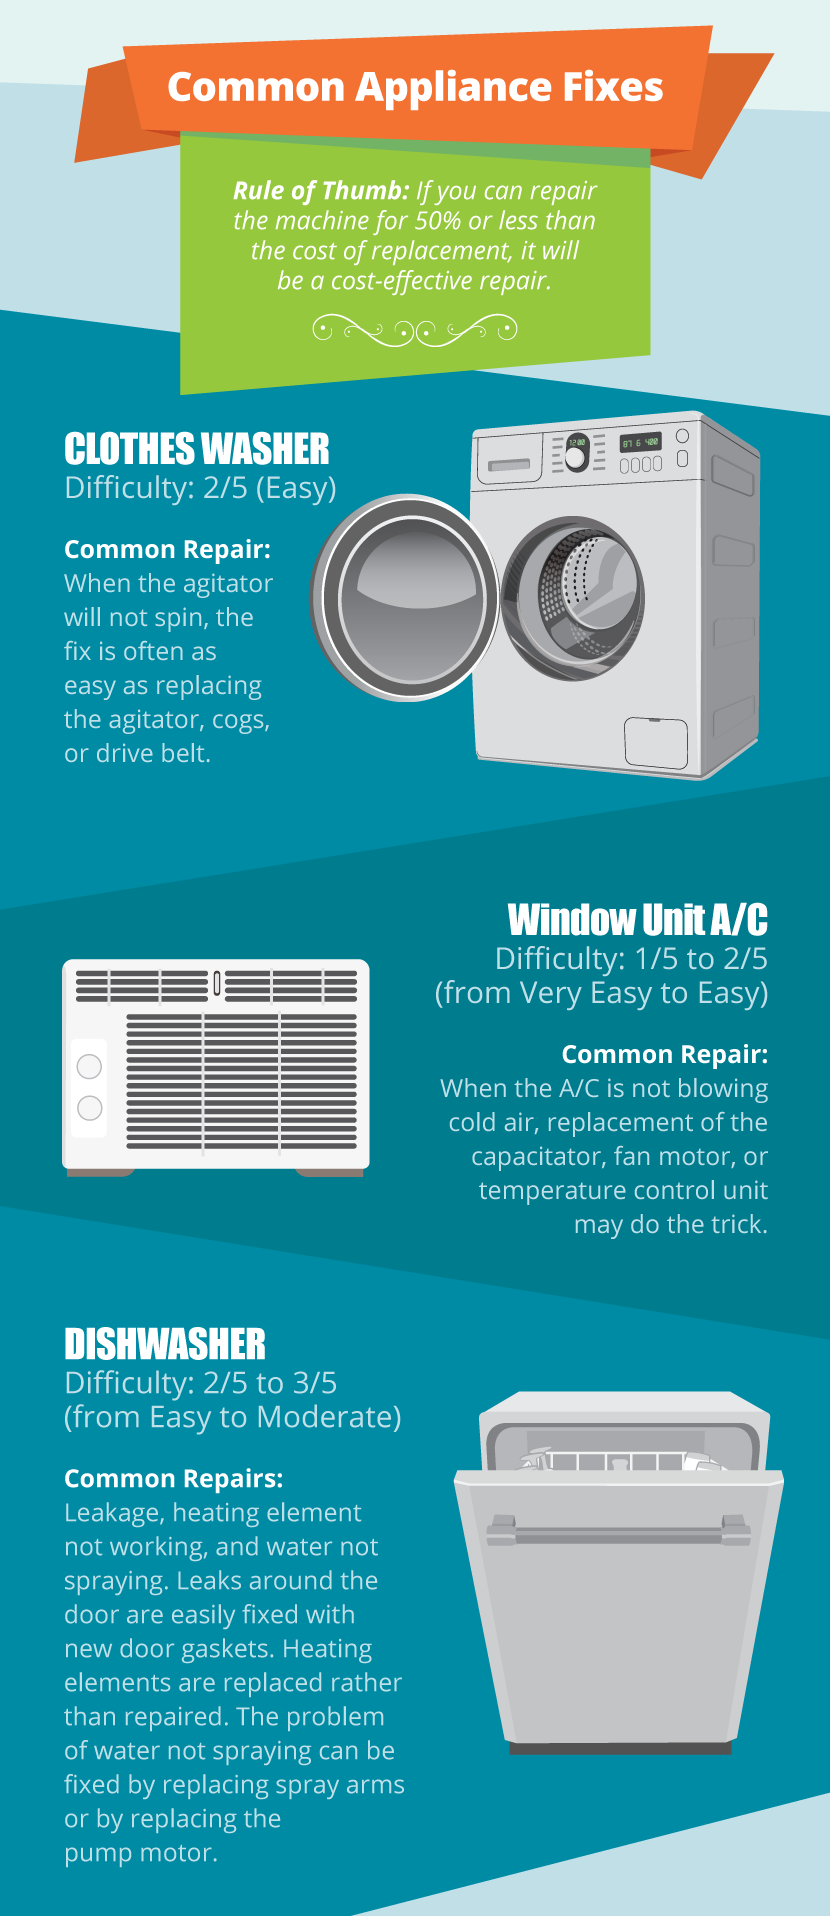 Common Appliance Fixes - The Definitive Guide to Repair, Replace, and Recycle